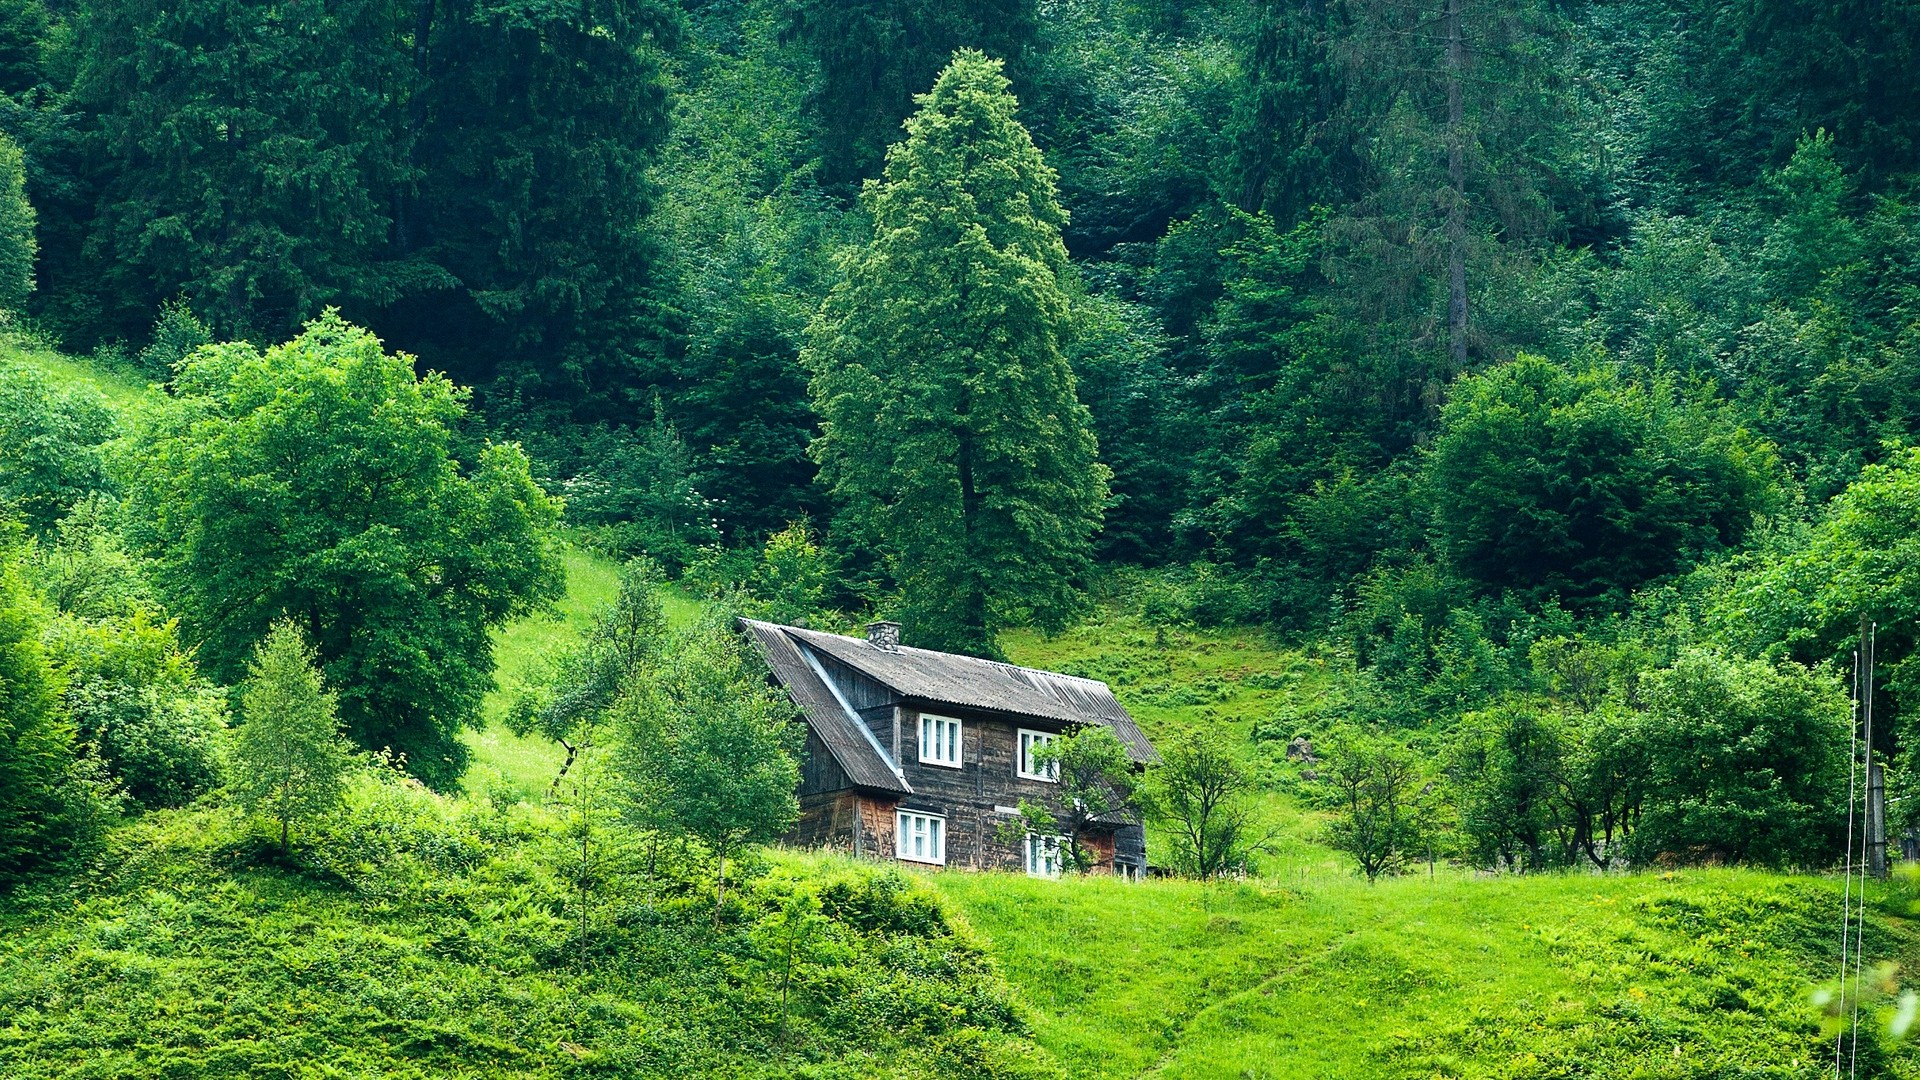 1920x1080 wallpapers: the house, forest, summer, grass (image)